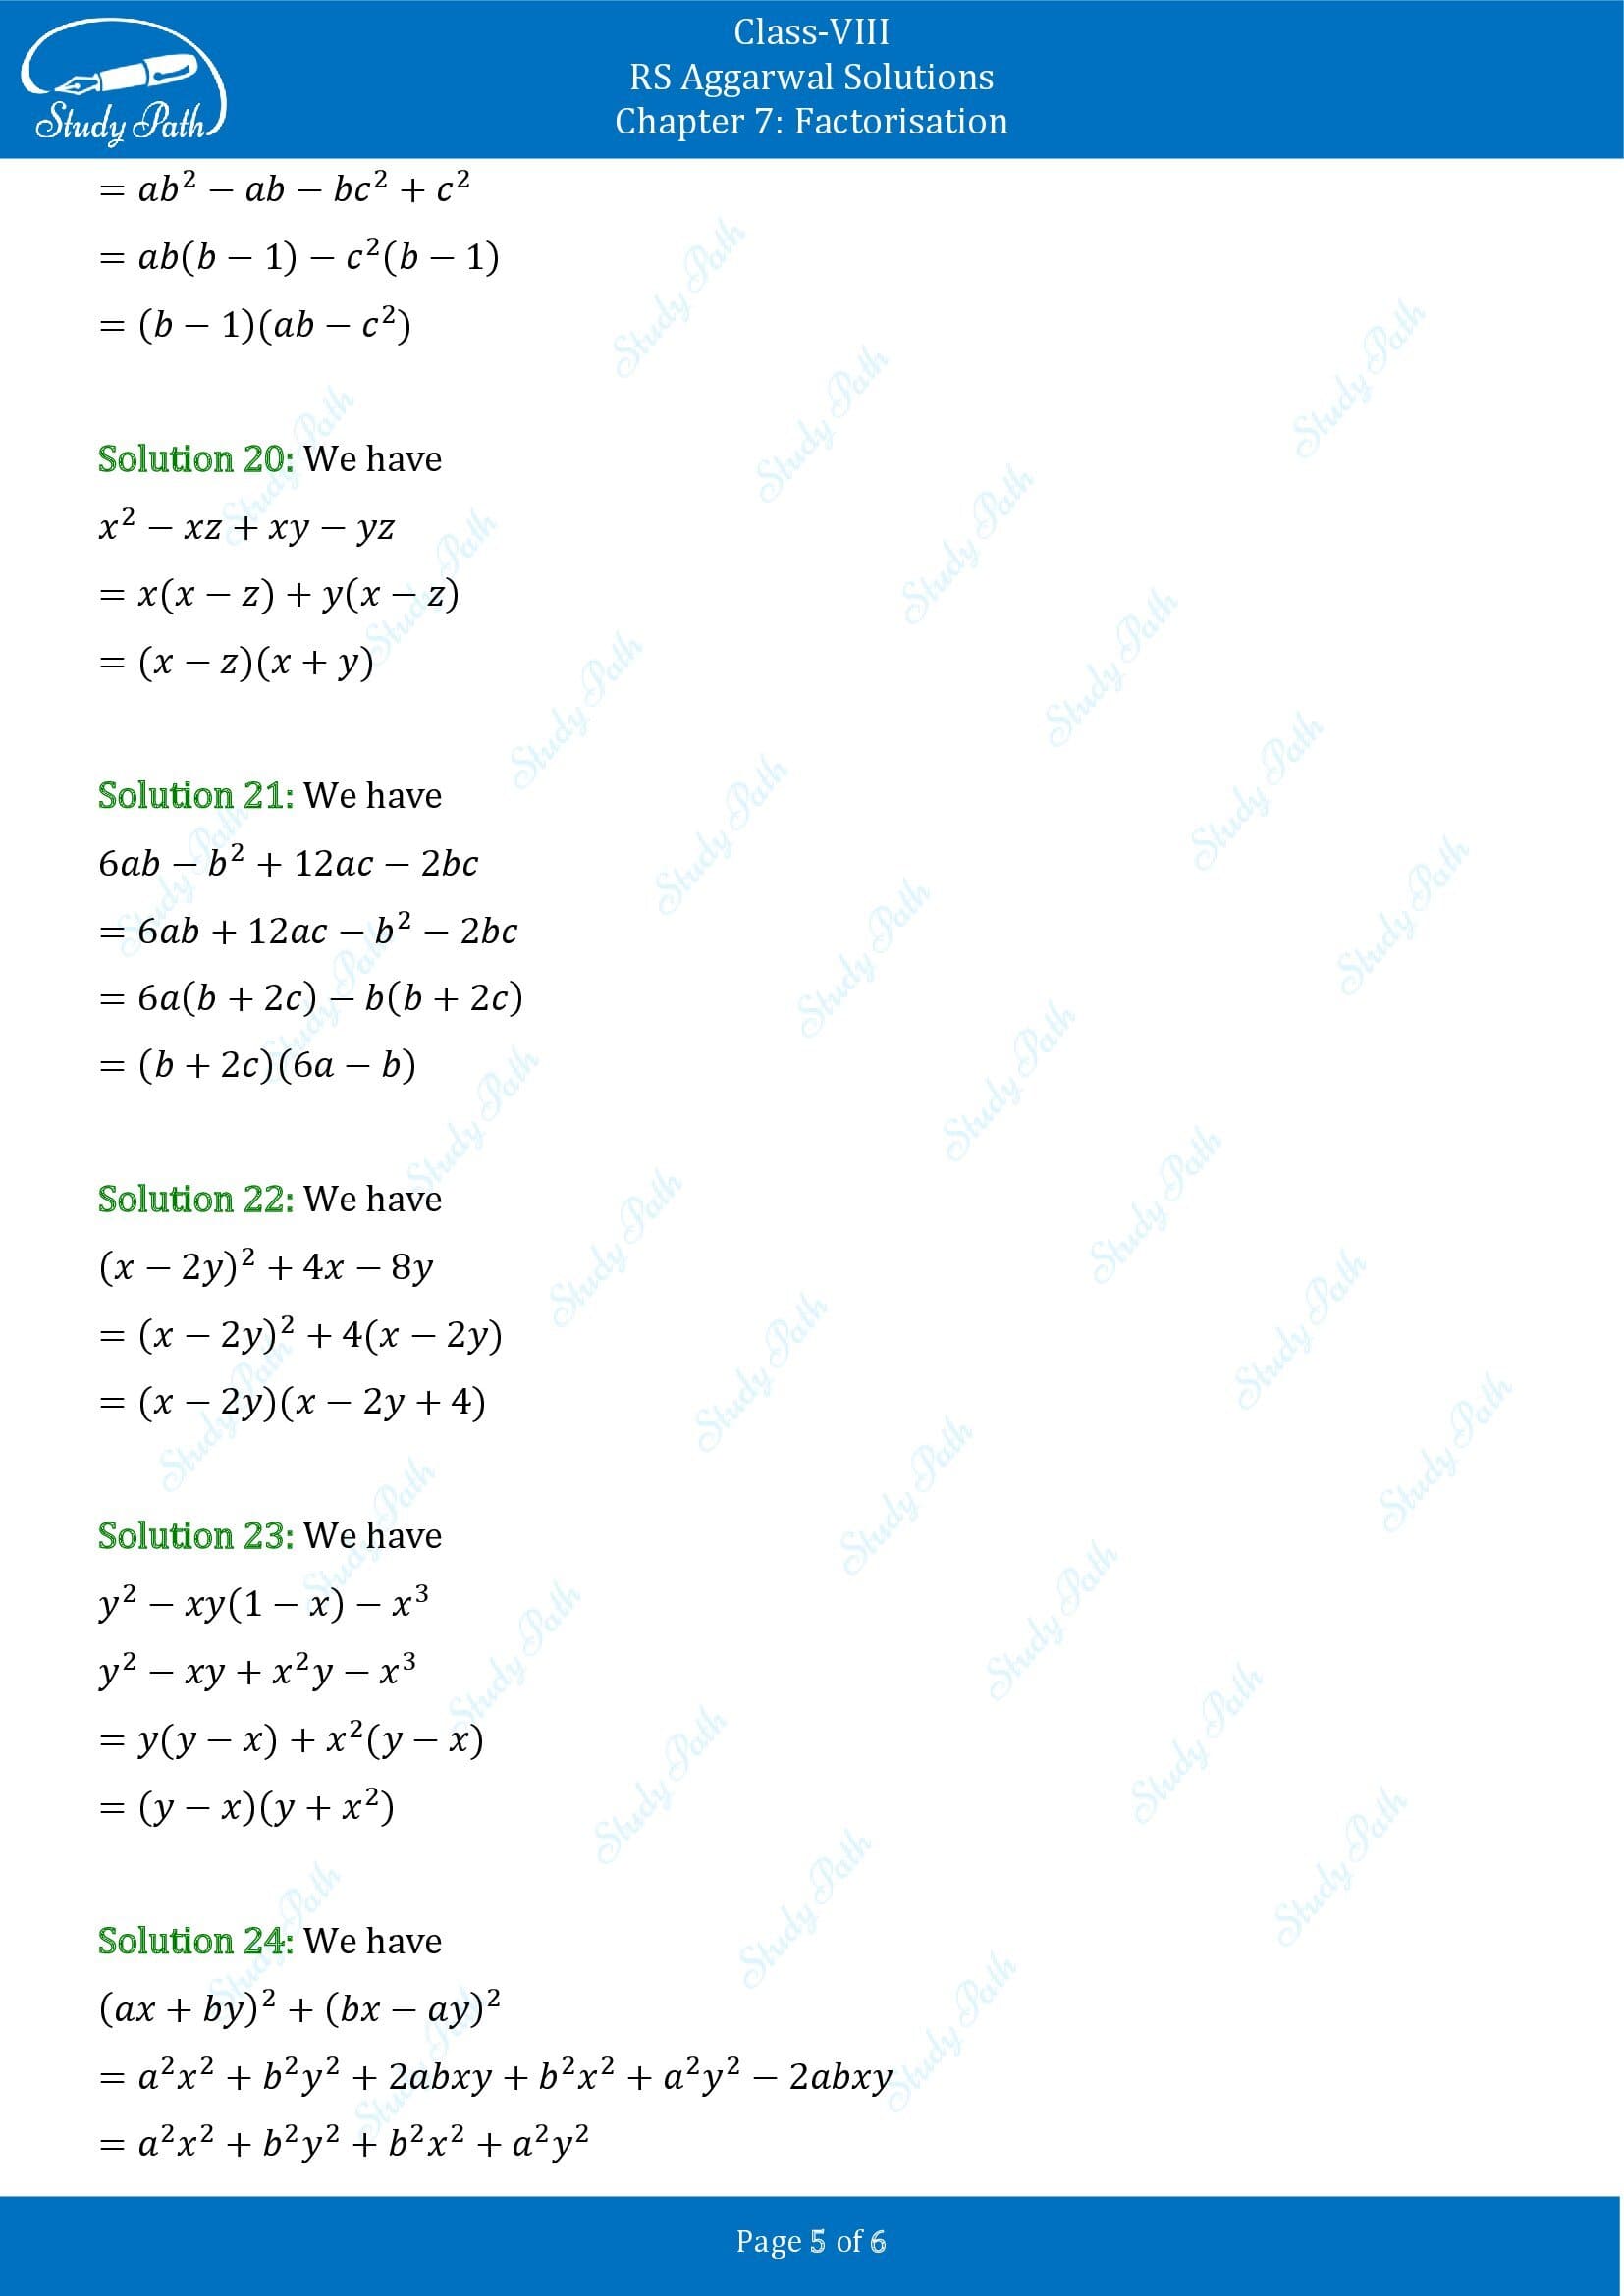 RS Aggarwal Solutions Class 8 Chapter 7 Factorisation Exercise 7A 00005